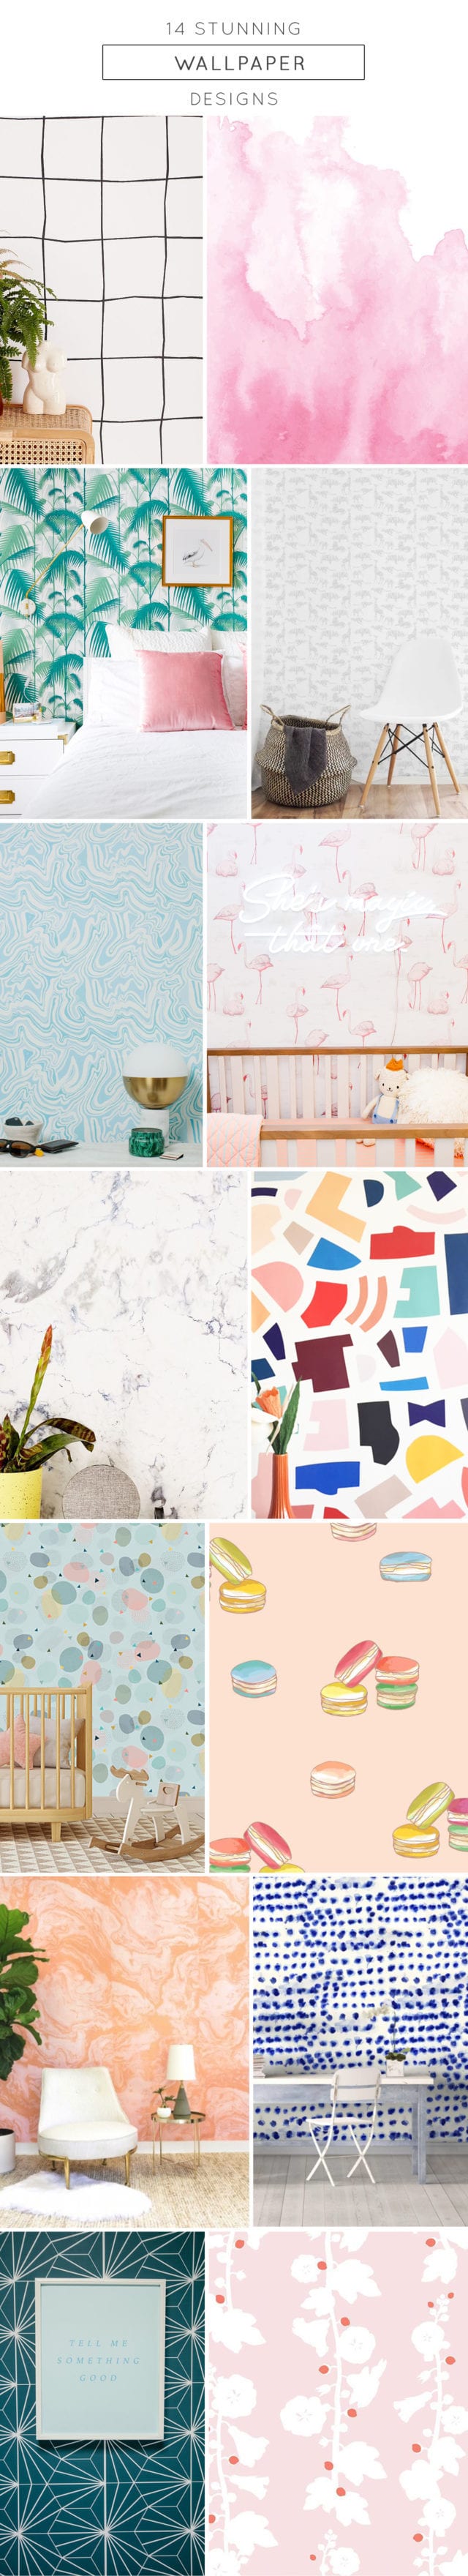 photo of our favorite quirky wallpaper designs